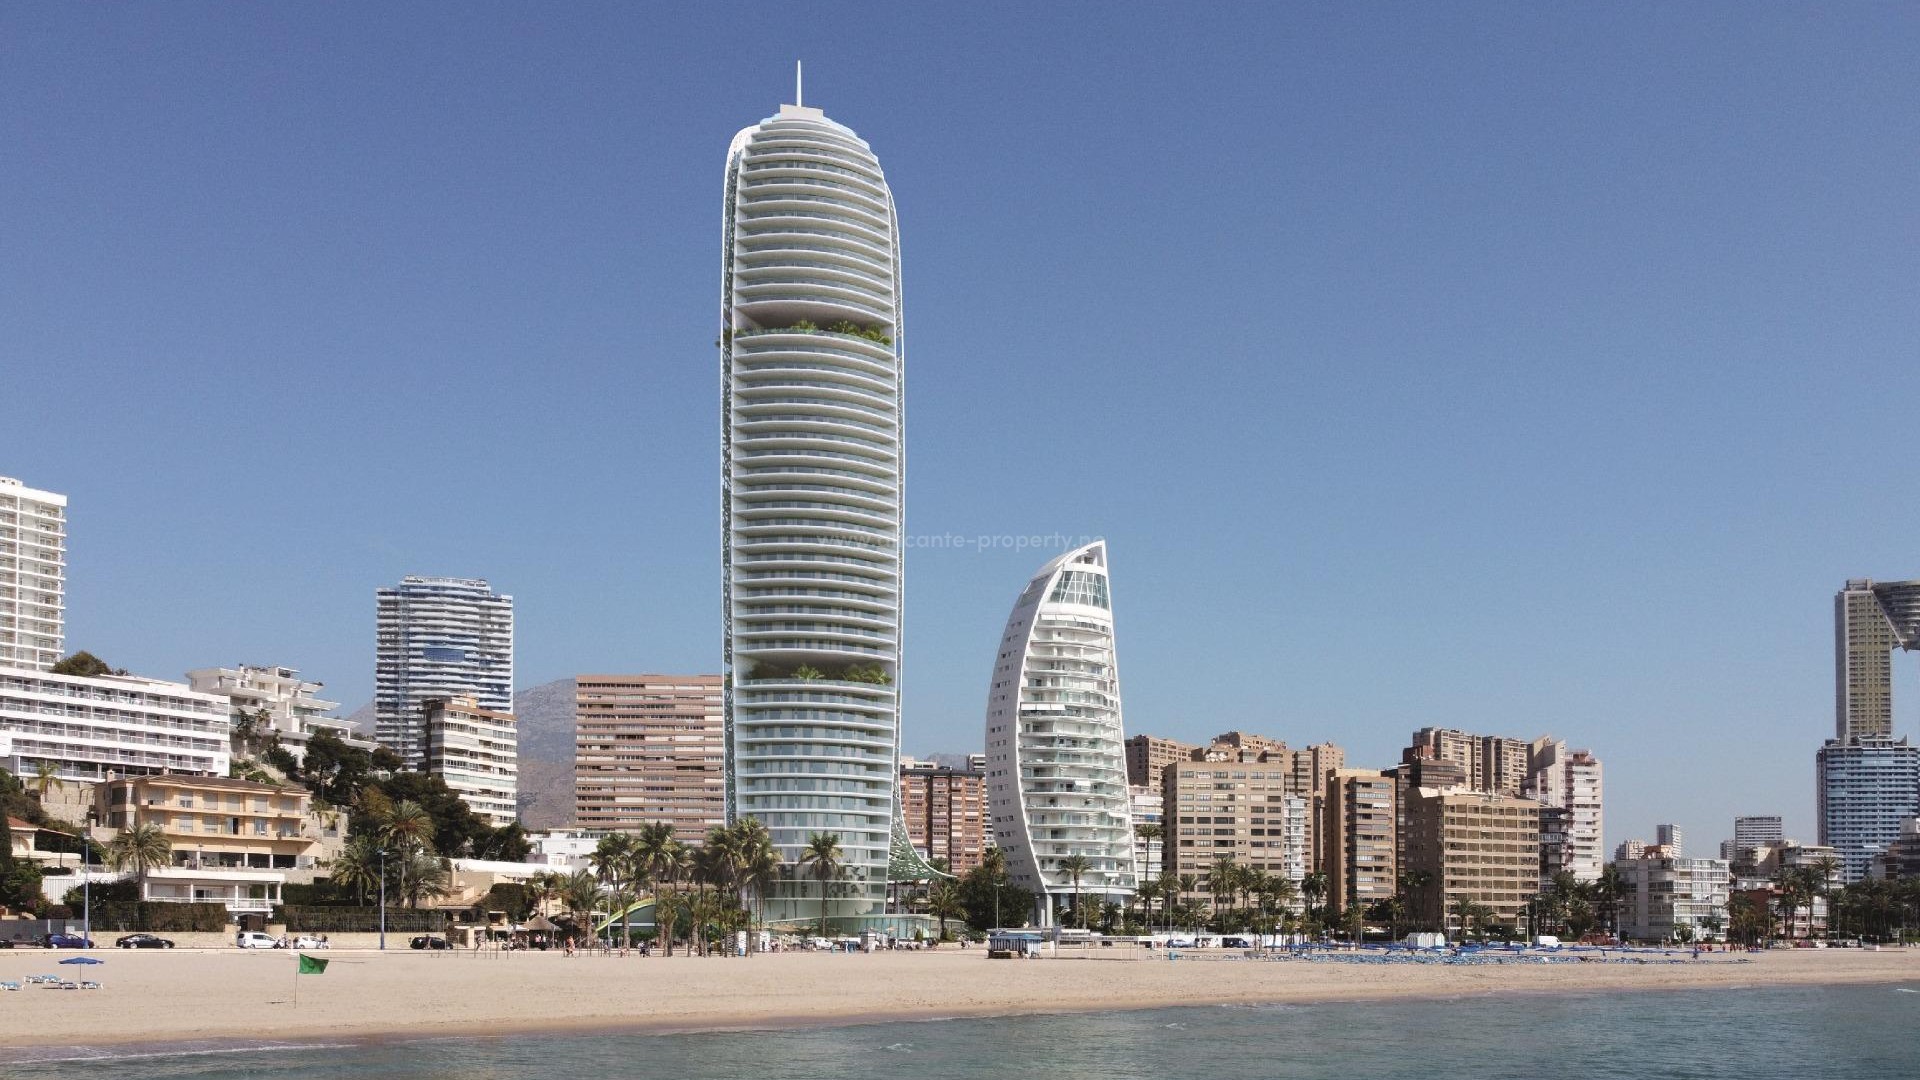 Luxurious frontline apartment complex in Benidorm, different sizes of apartments all with fantastic communal areas